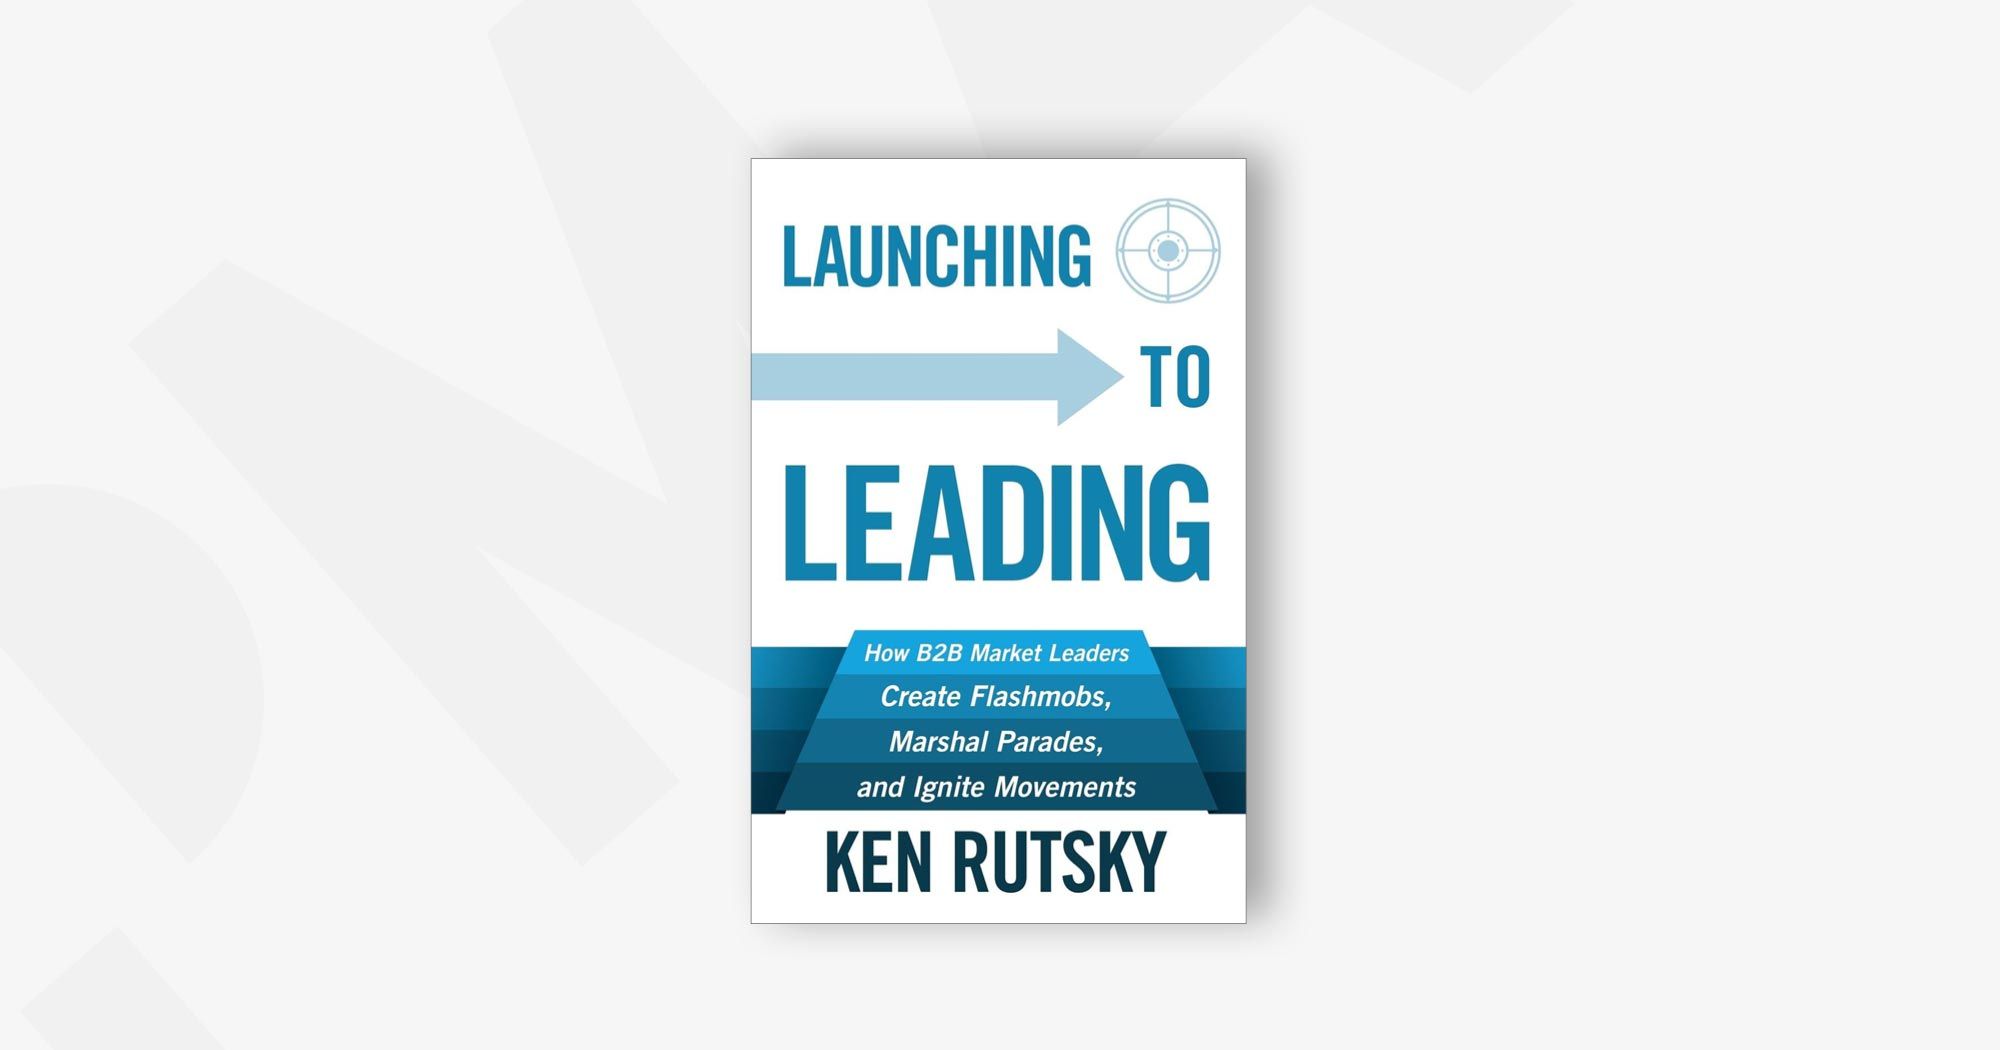 Launching to Leading: How B2B Market Leaders Create Flashmobs, Marshal Parades and Ignite Movements – Ken Rutsky